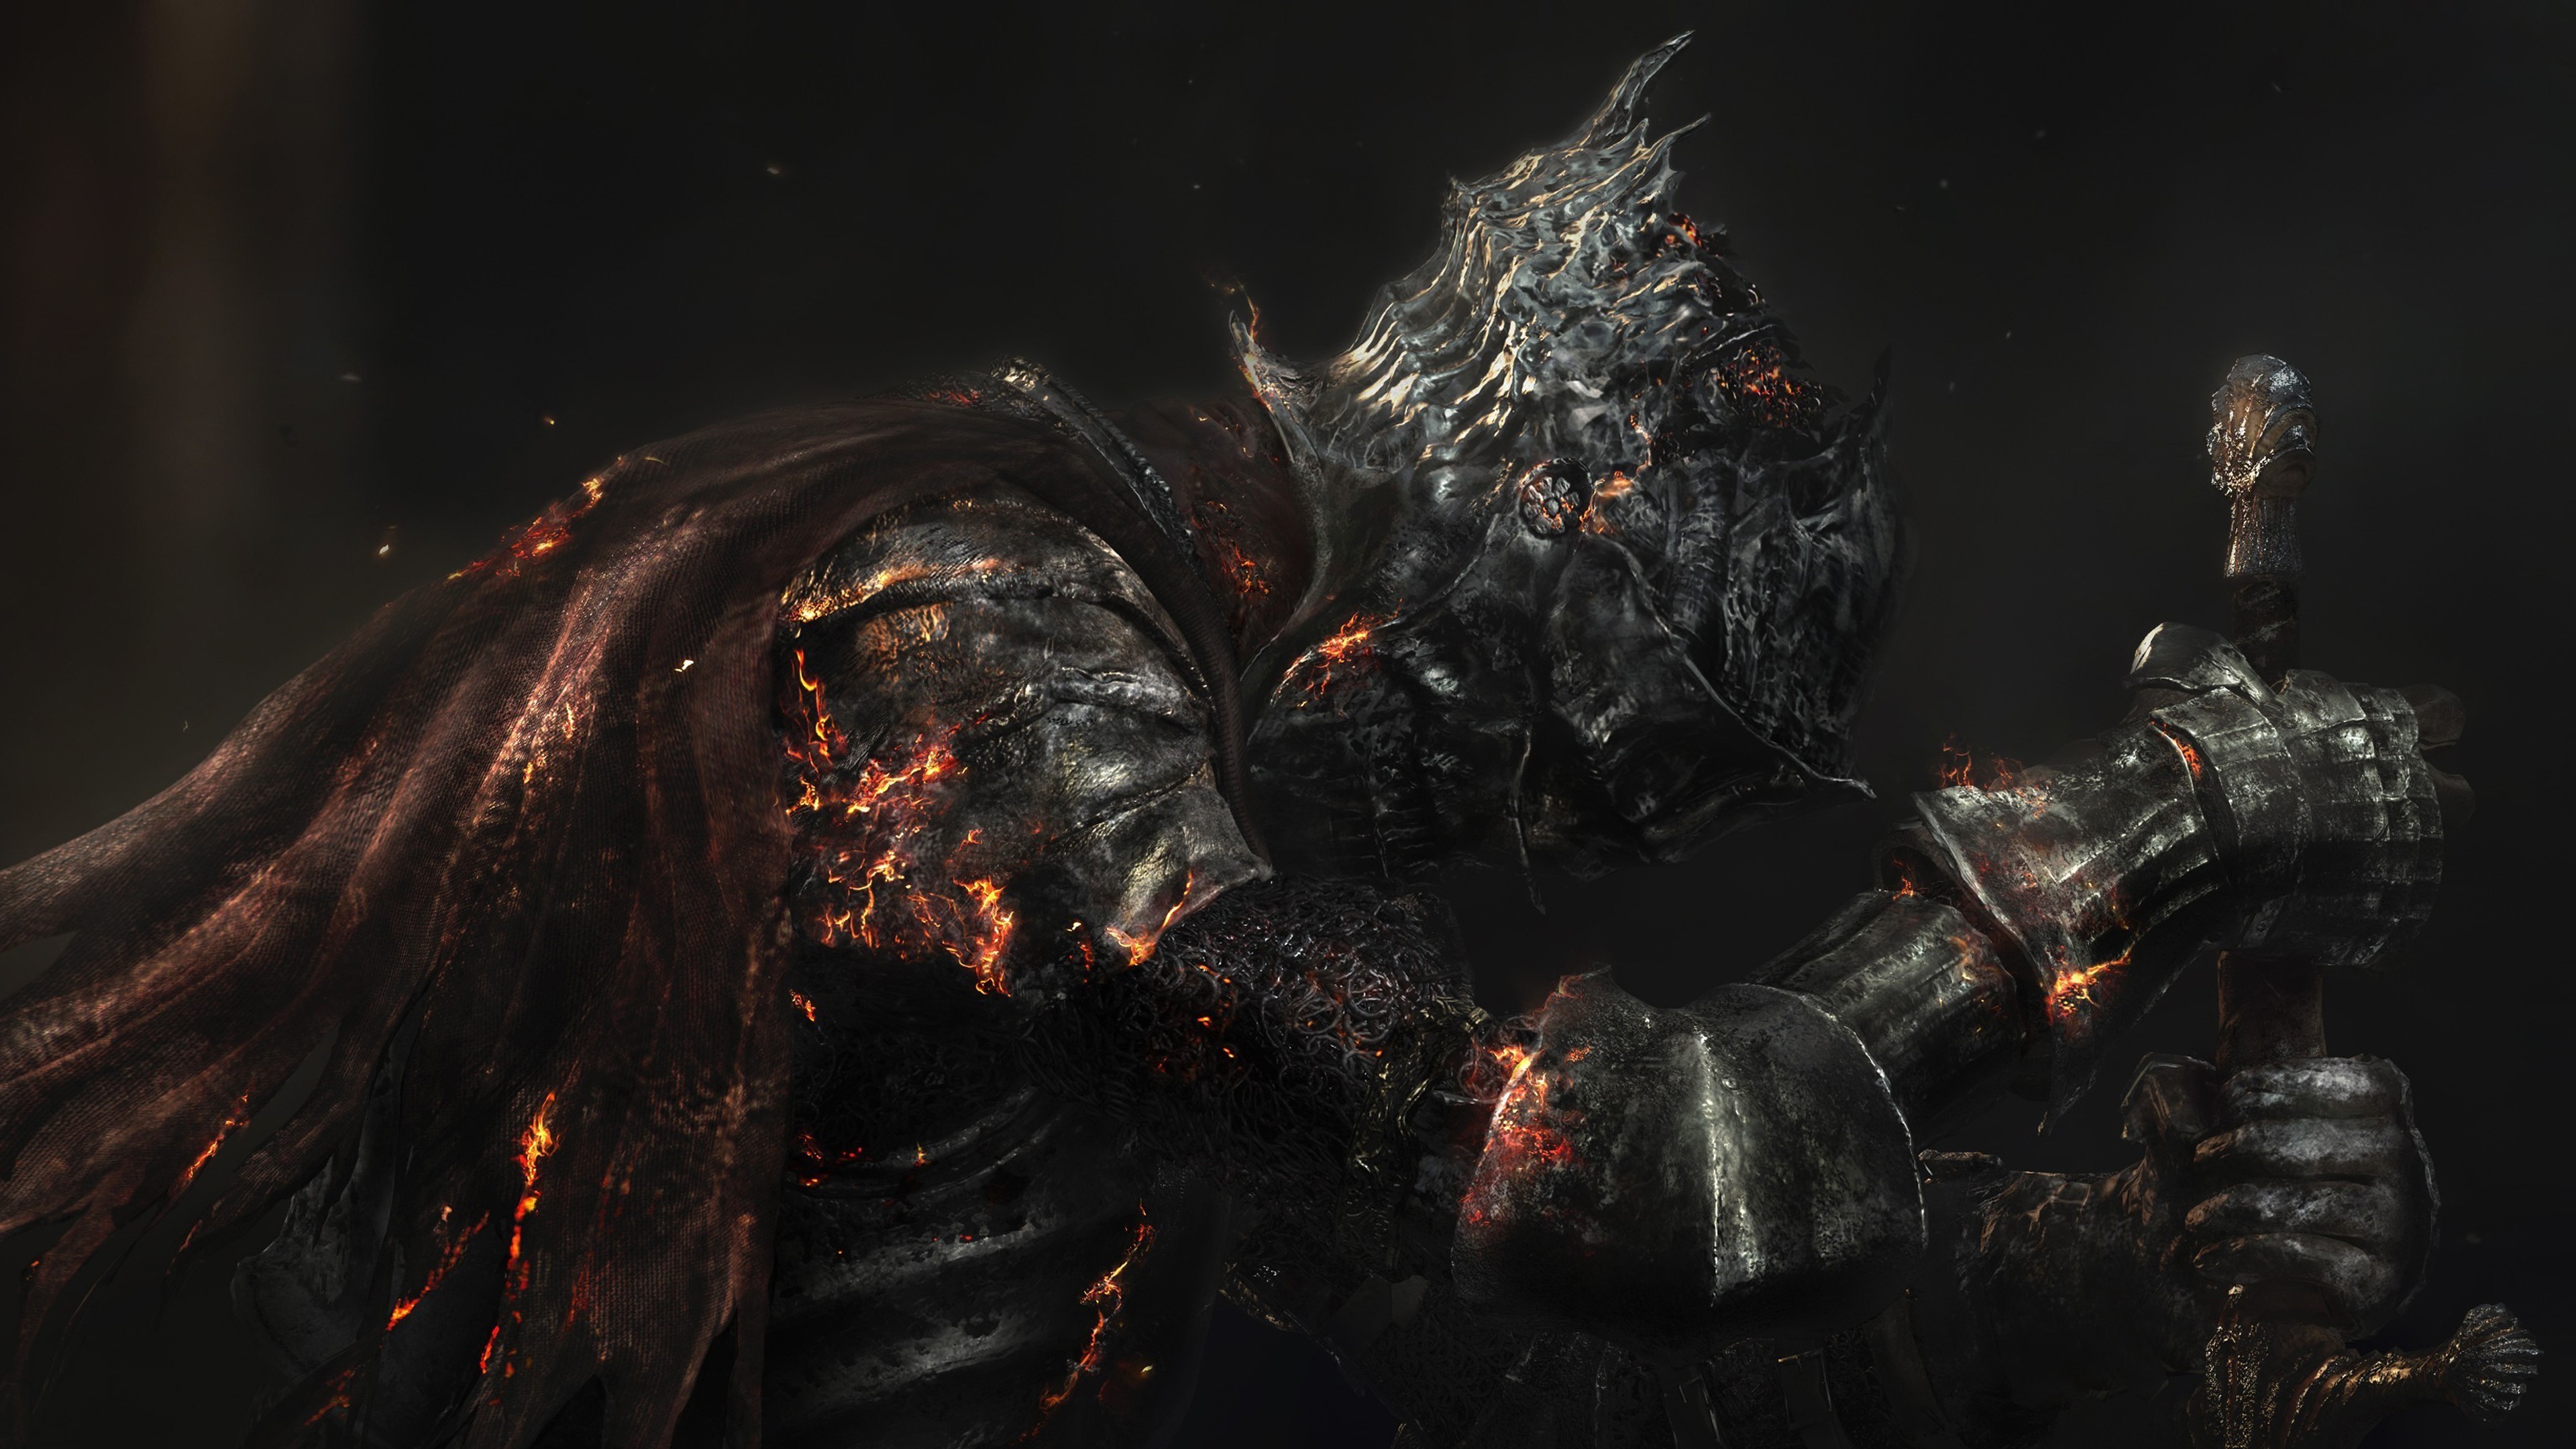 3840x2160 and this one 4k dark souls wallpaper for whoever wanted one